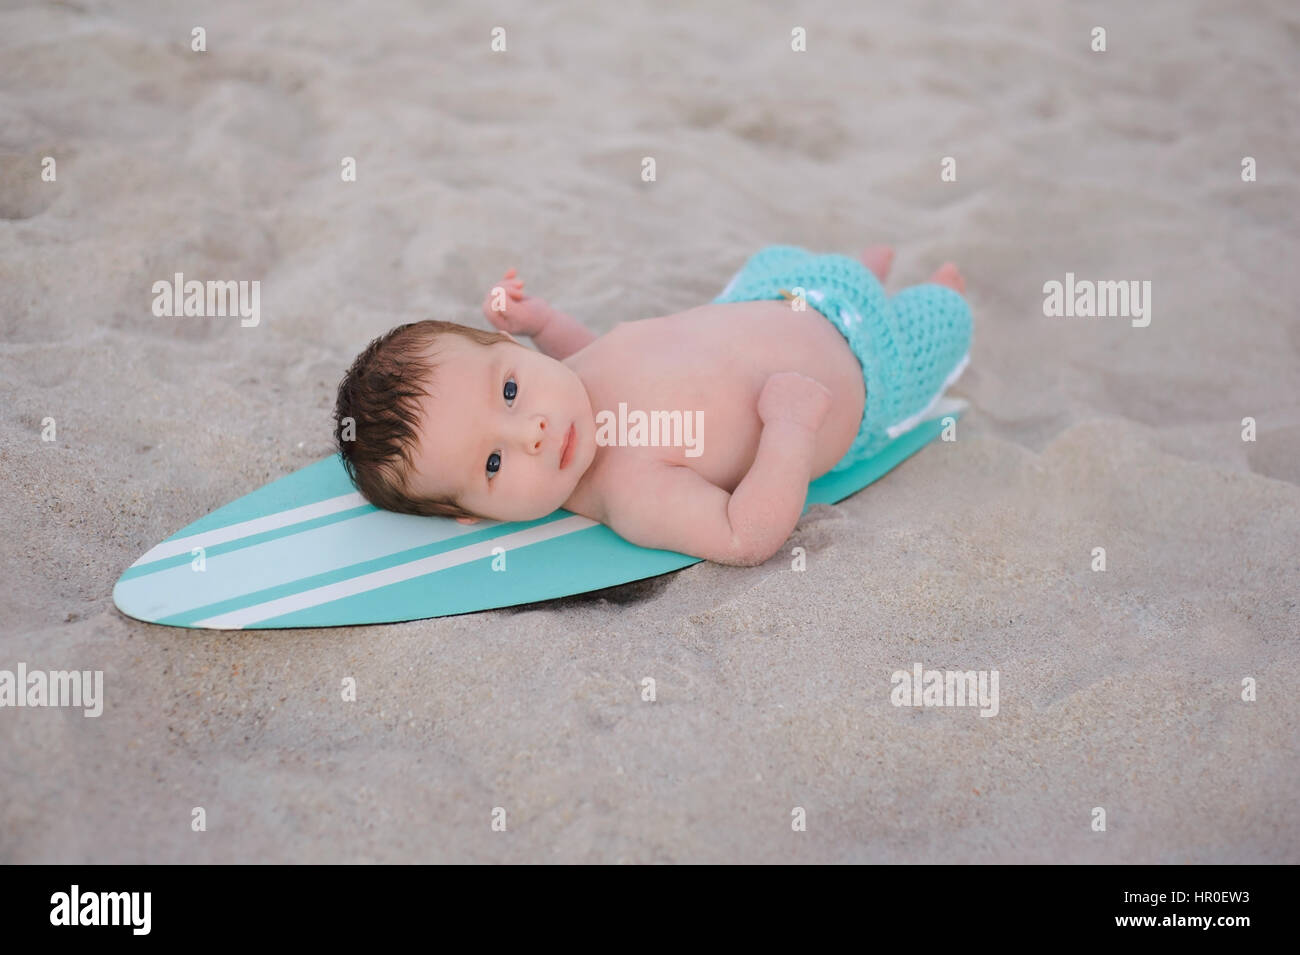 Two week old newborn baby boy lying on a tiny, turquoise blue and white surfboard. He is wearing aqua colored, board shorts and lying on a sandy beach Stock Photo